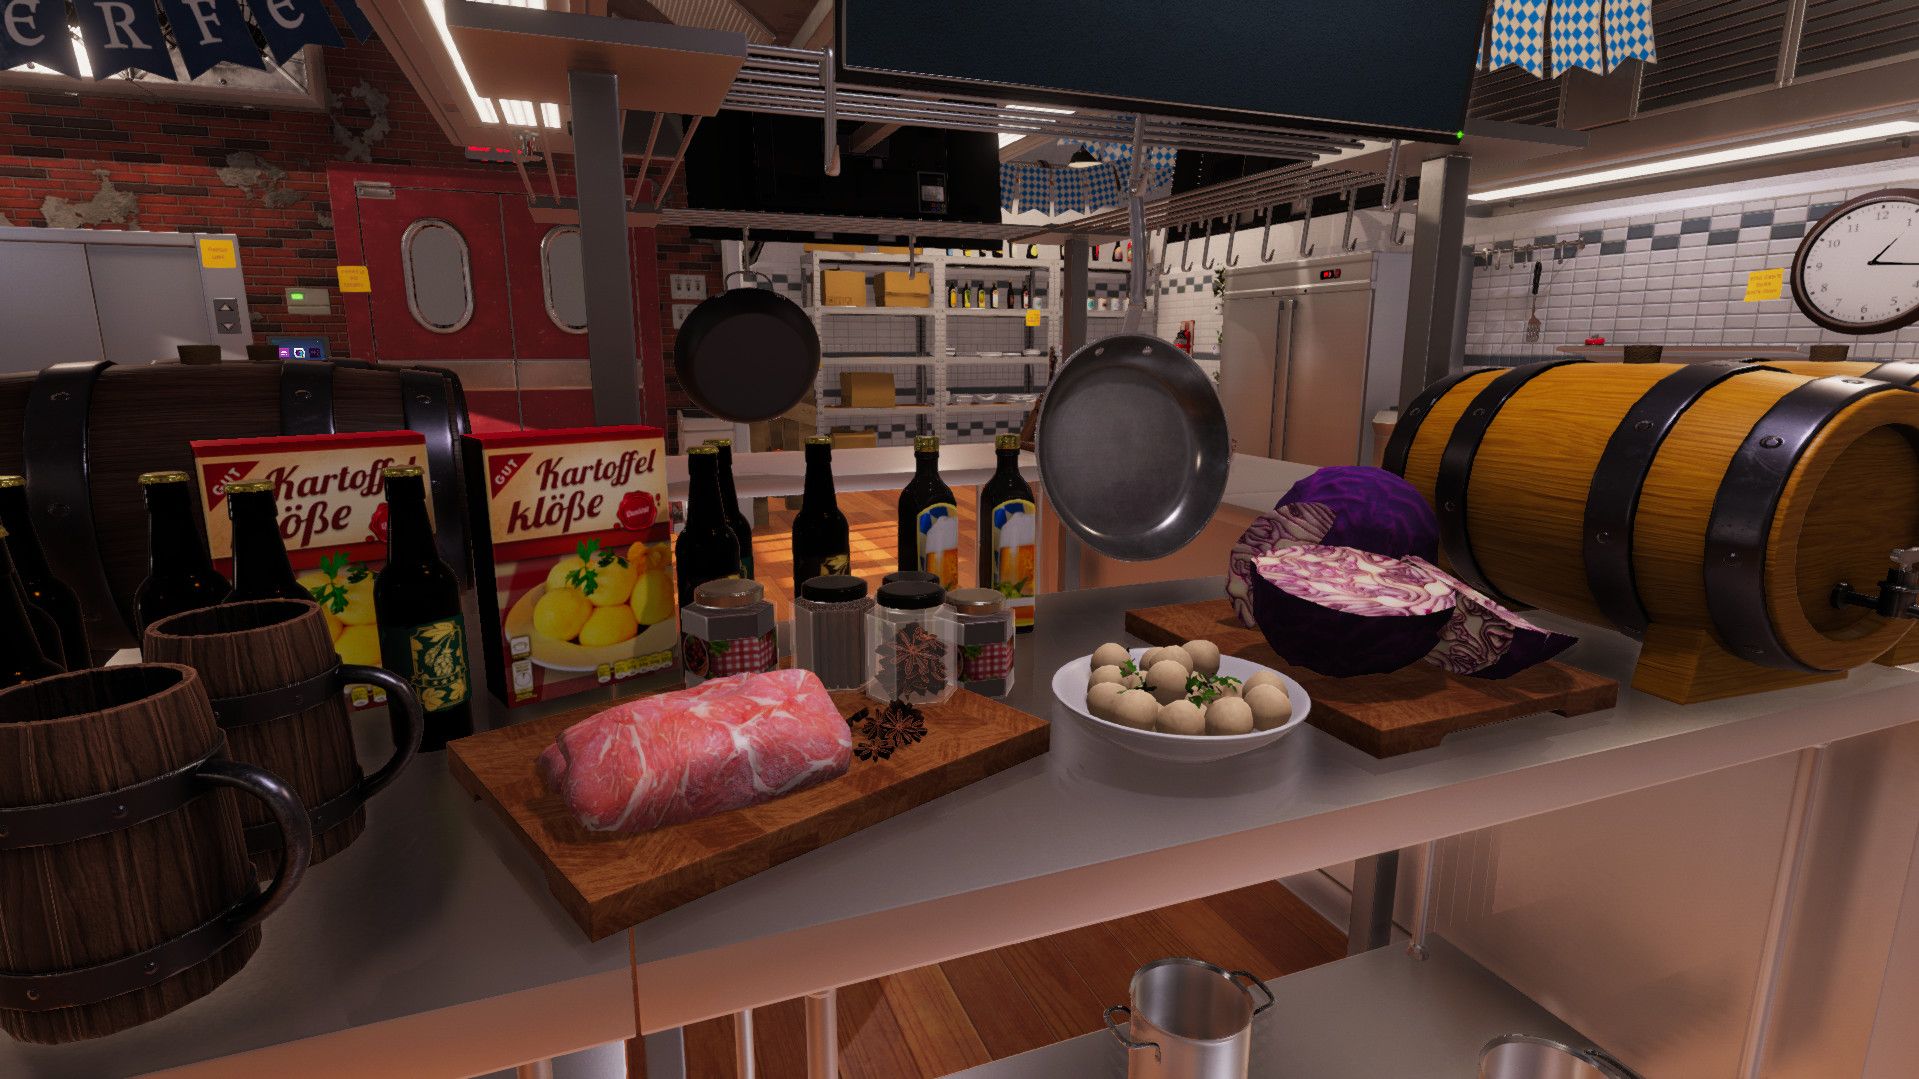 Fire Up the Oven for New Cooking Simulator DLC, Cakes and Cookies